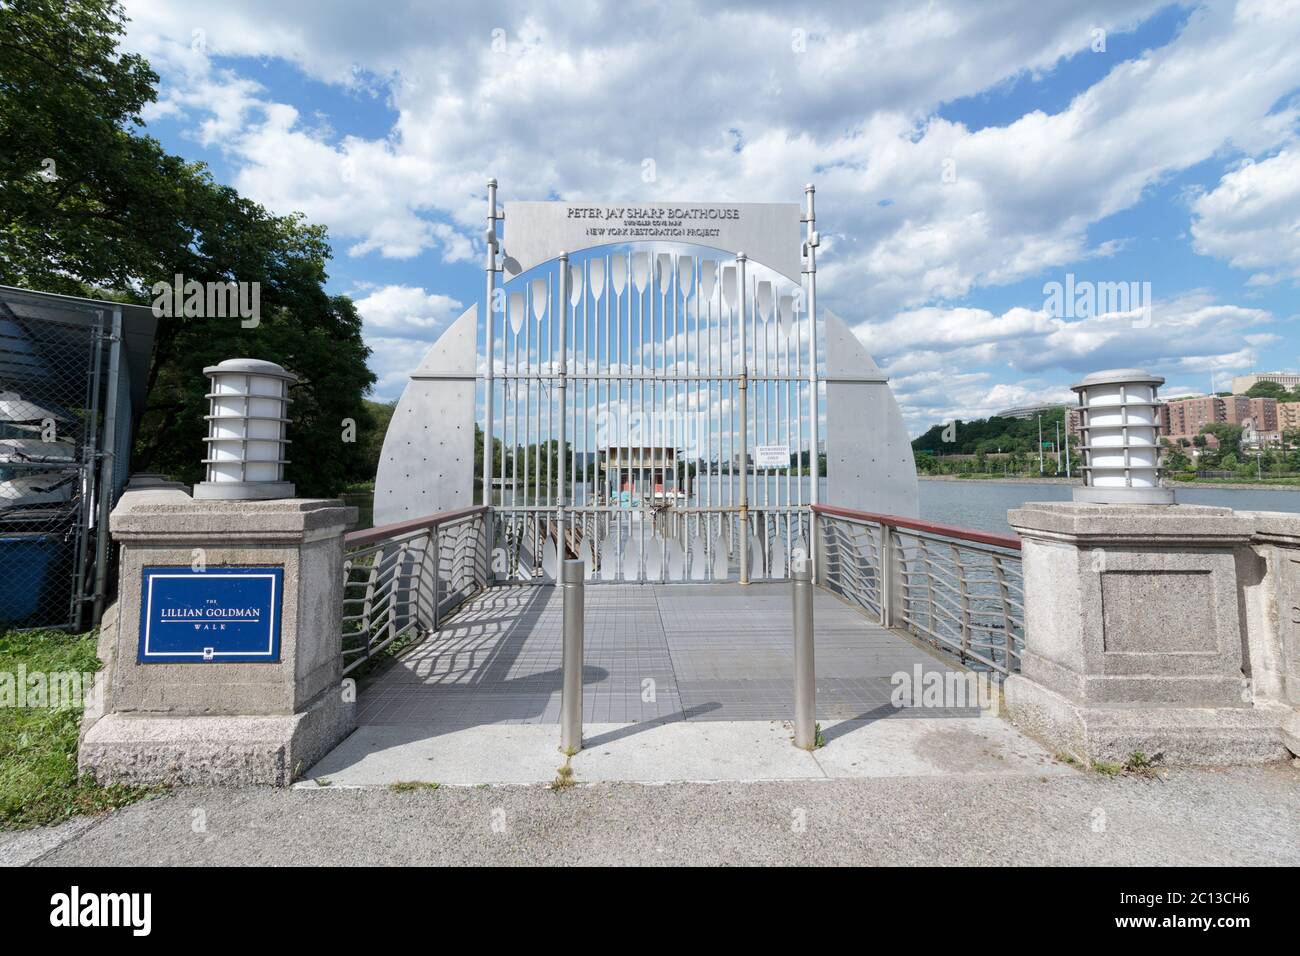 the gate to the Peter Jay Sharp Boathouse on the Harlem River which offers water sports and recreation programs Stock Photo